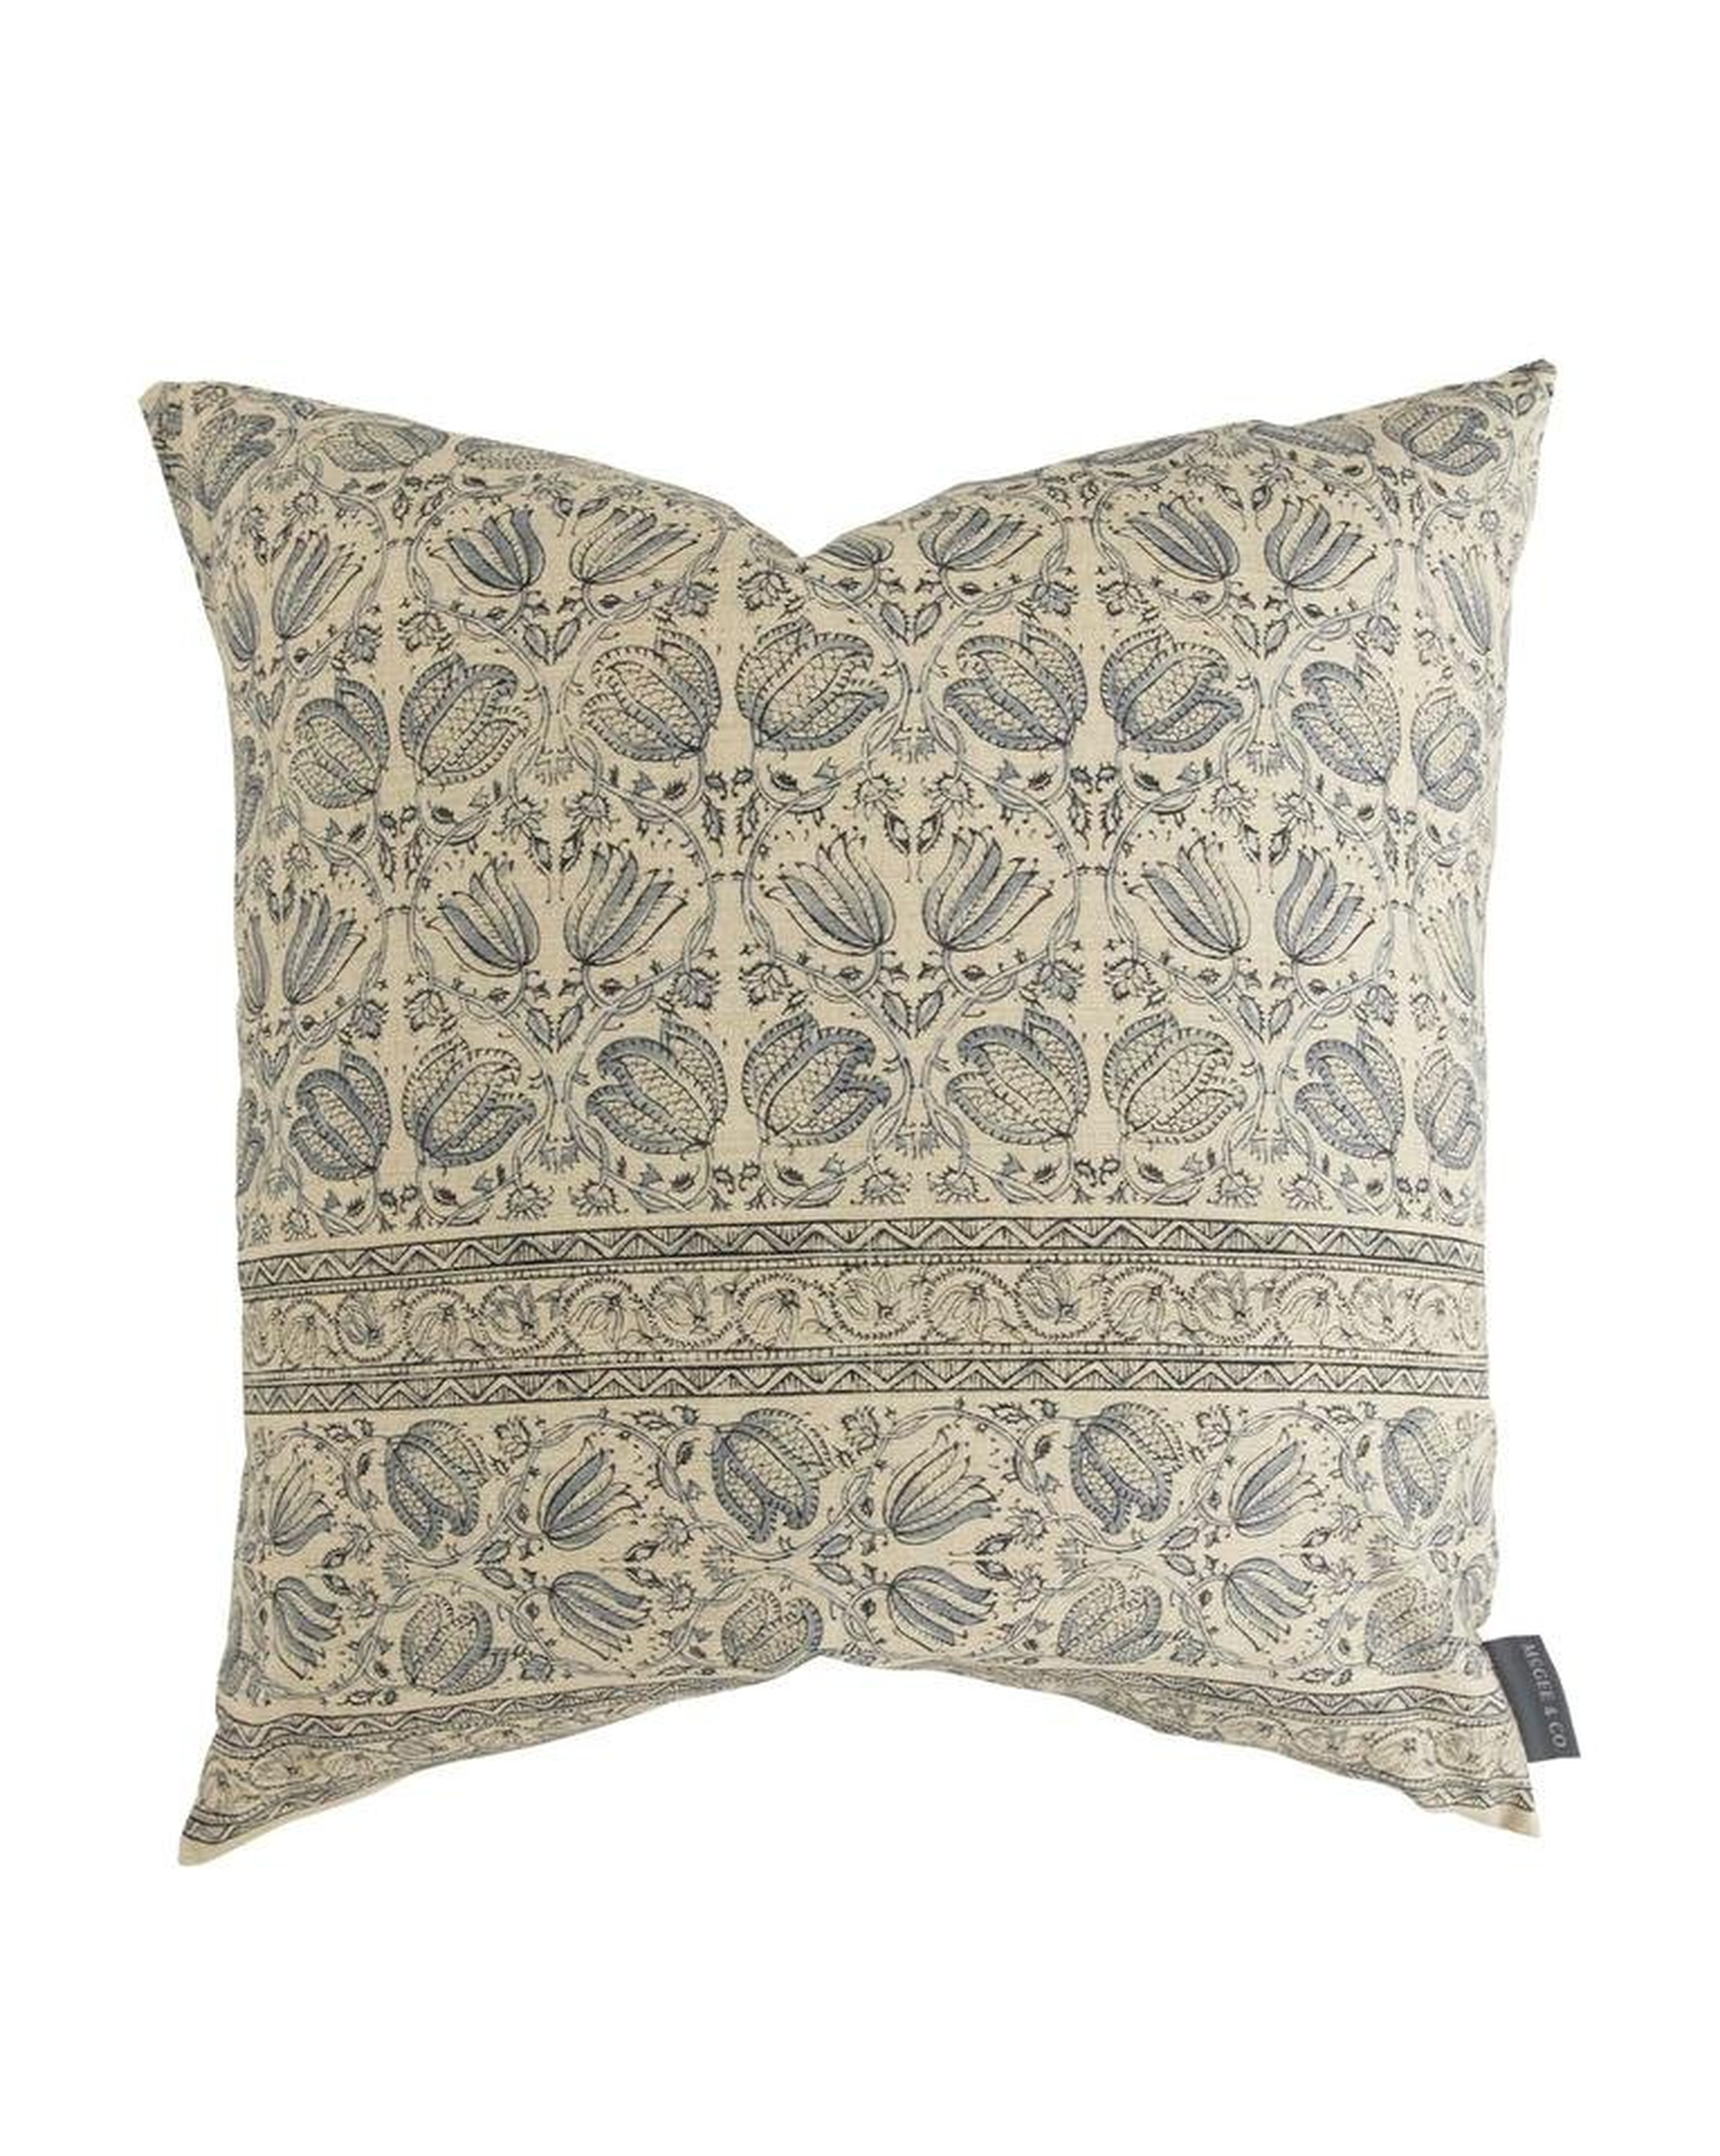 Danny Floral Print Pillow Cover, 22" x 22" - McGee & Co.